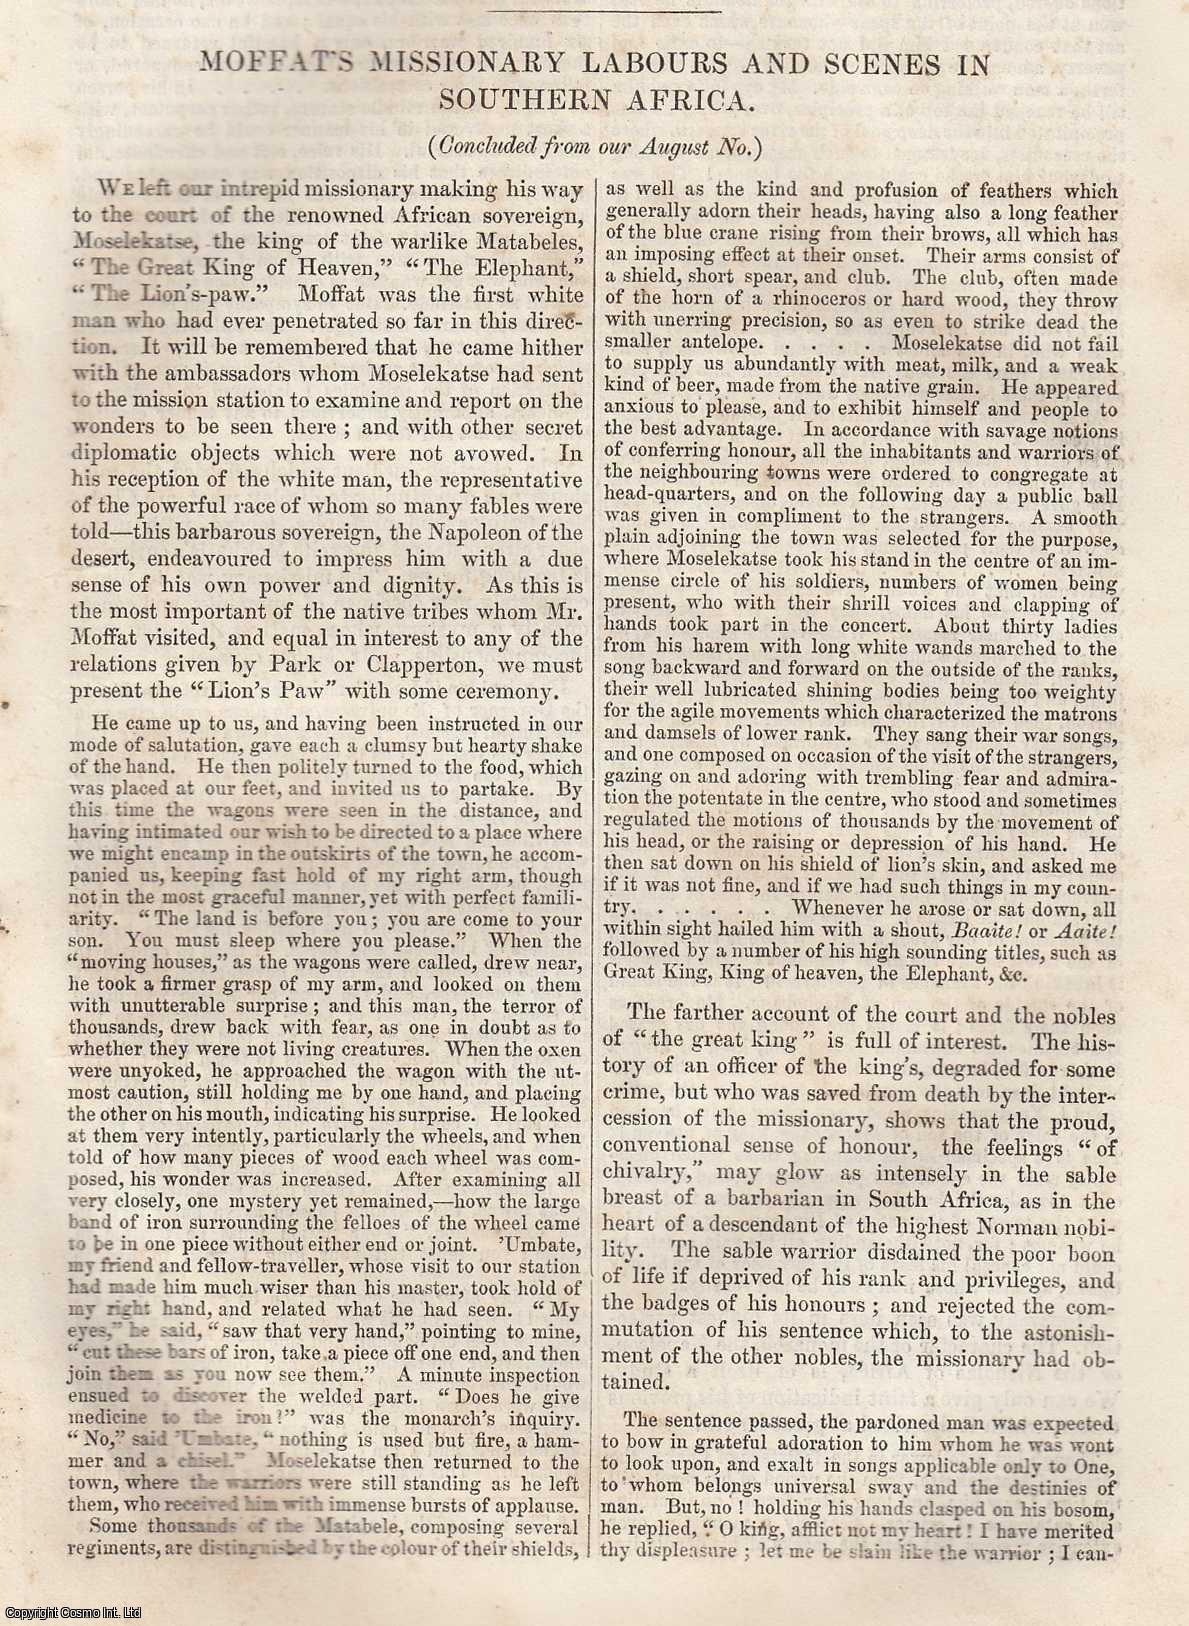 Johnstone, Christian - Moffat's Missionary Labours and Scenes in Southern Africa (Part 2, concluded.). An original article from Tait's Edinburgh Magazine, 1842.